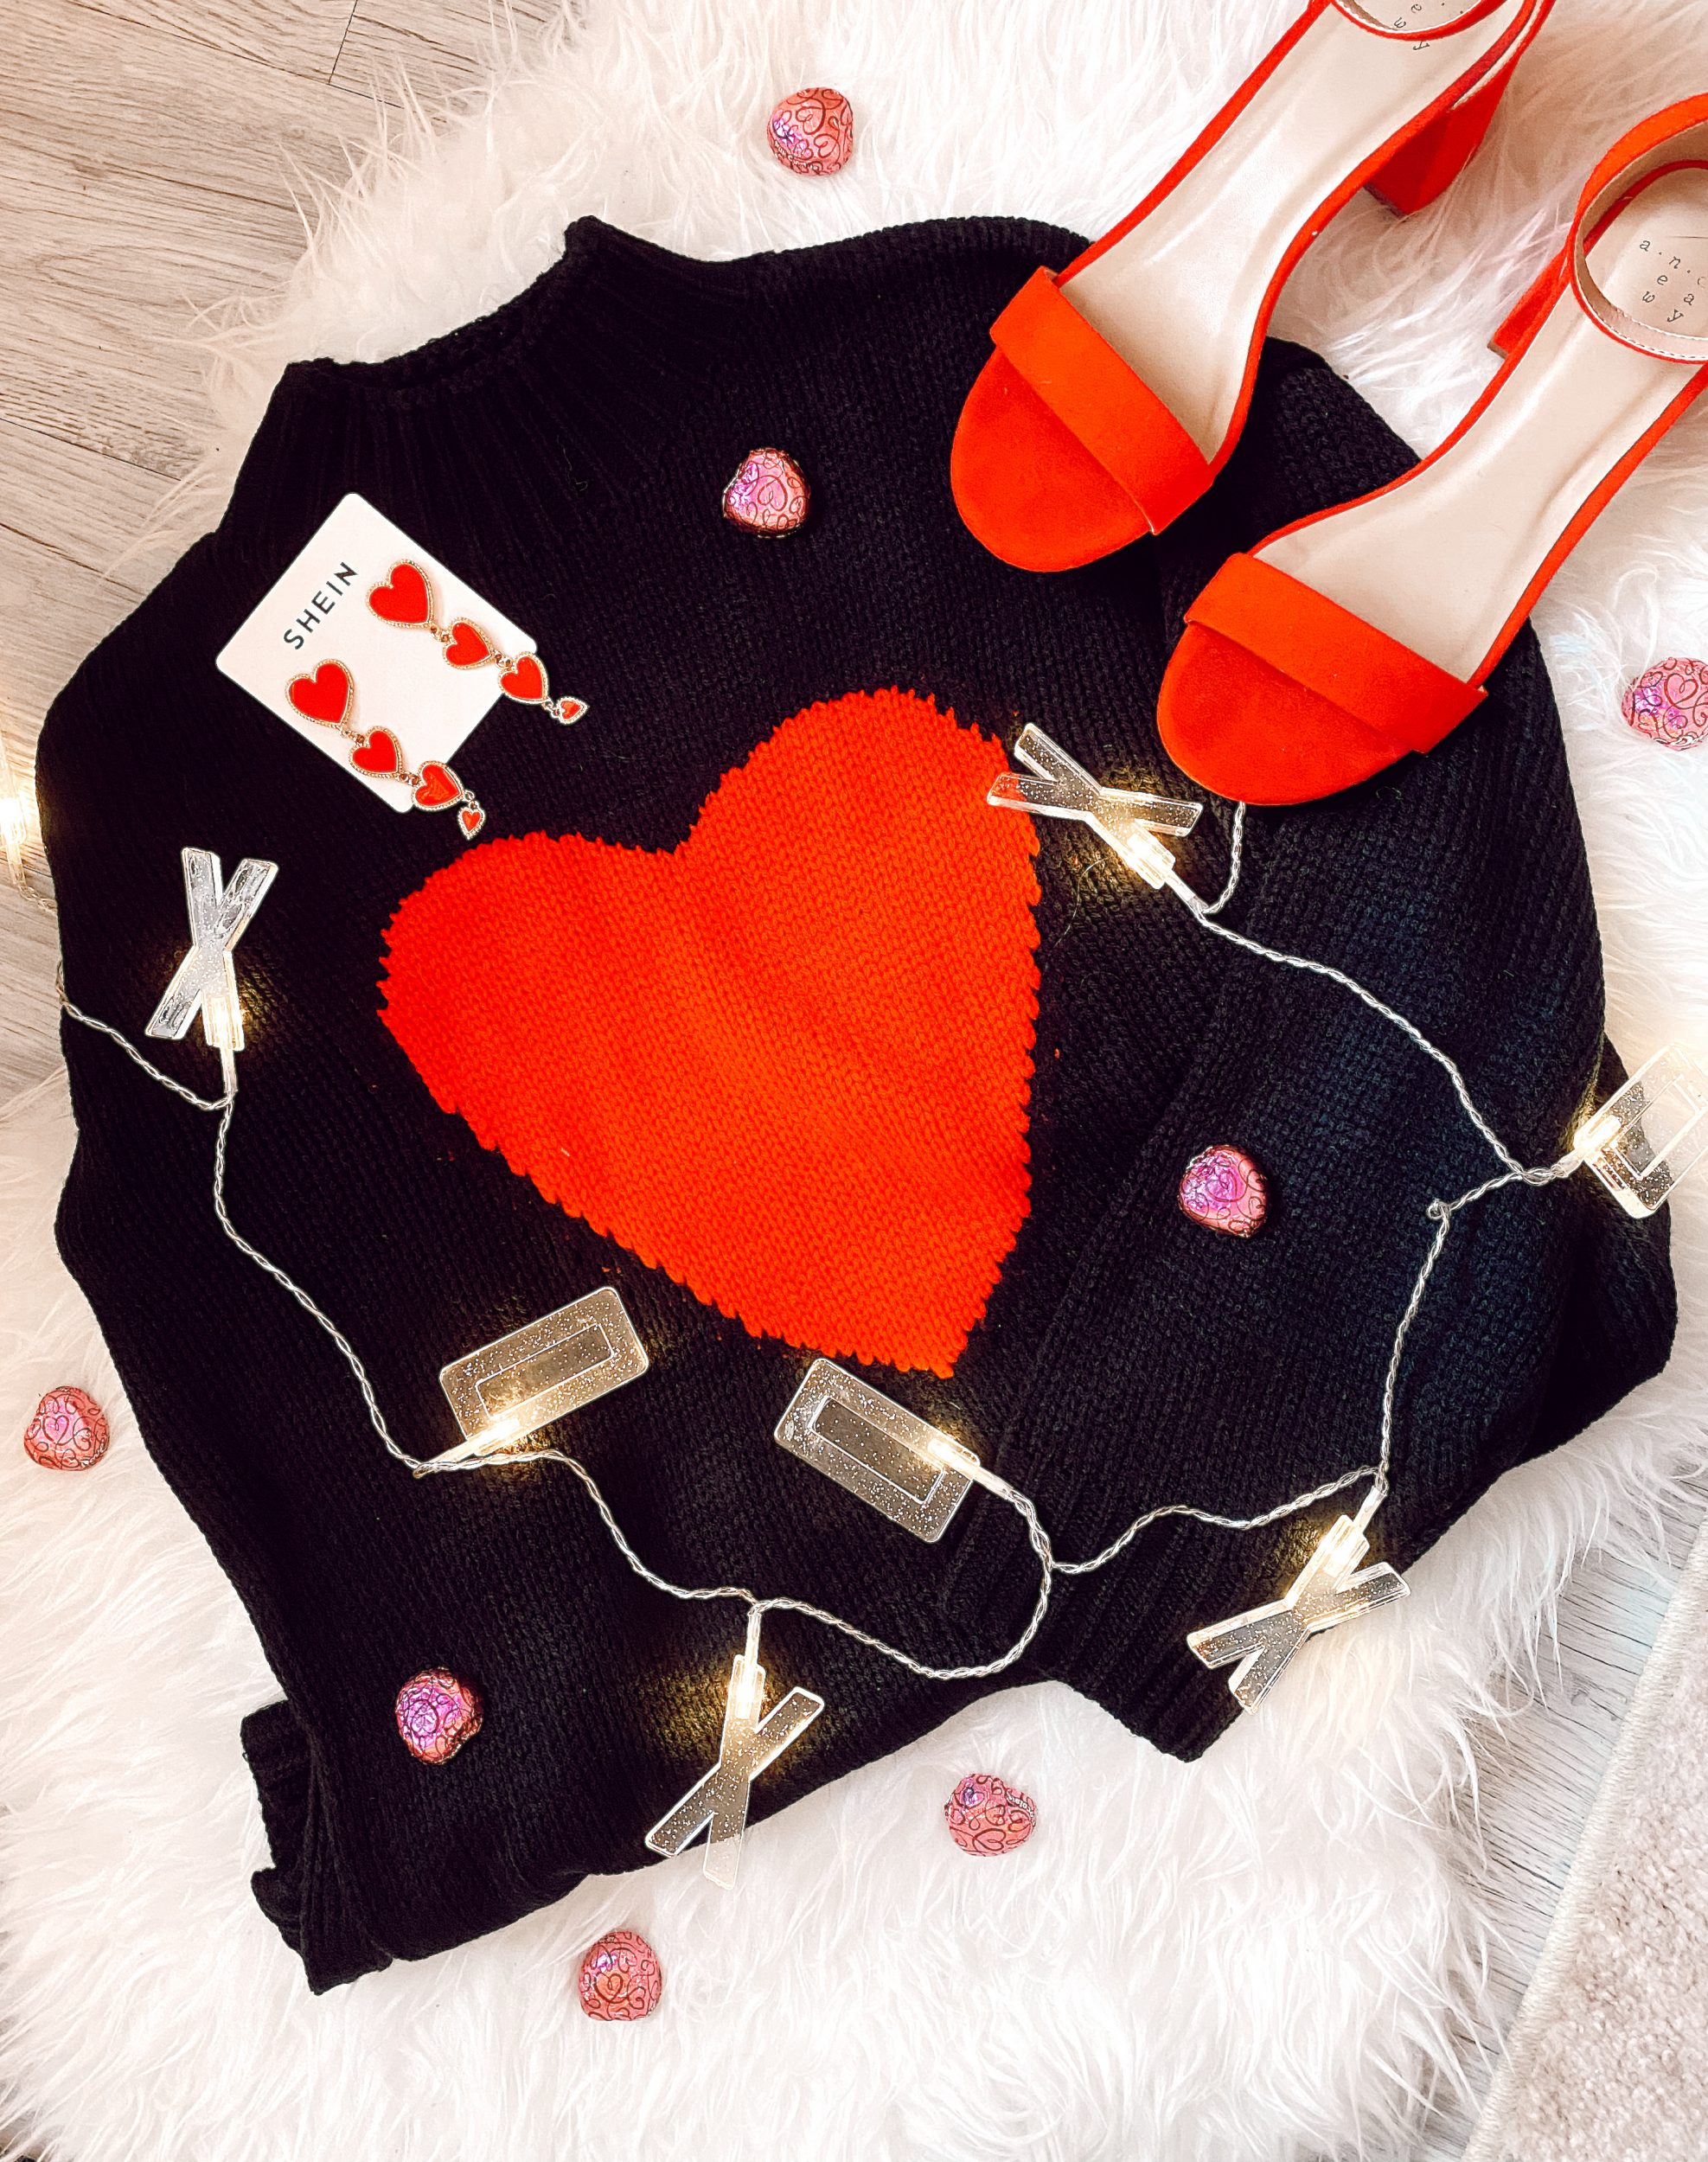 Heart Themed Outfits & Accessories For Valentine's Day By Jessica Linn owner of Linn Style Black and red heart sweater, red heart earrings, red heels.